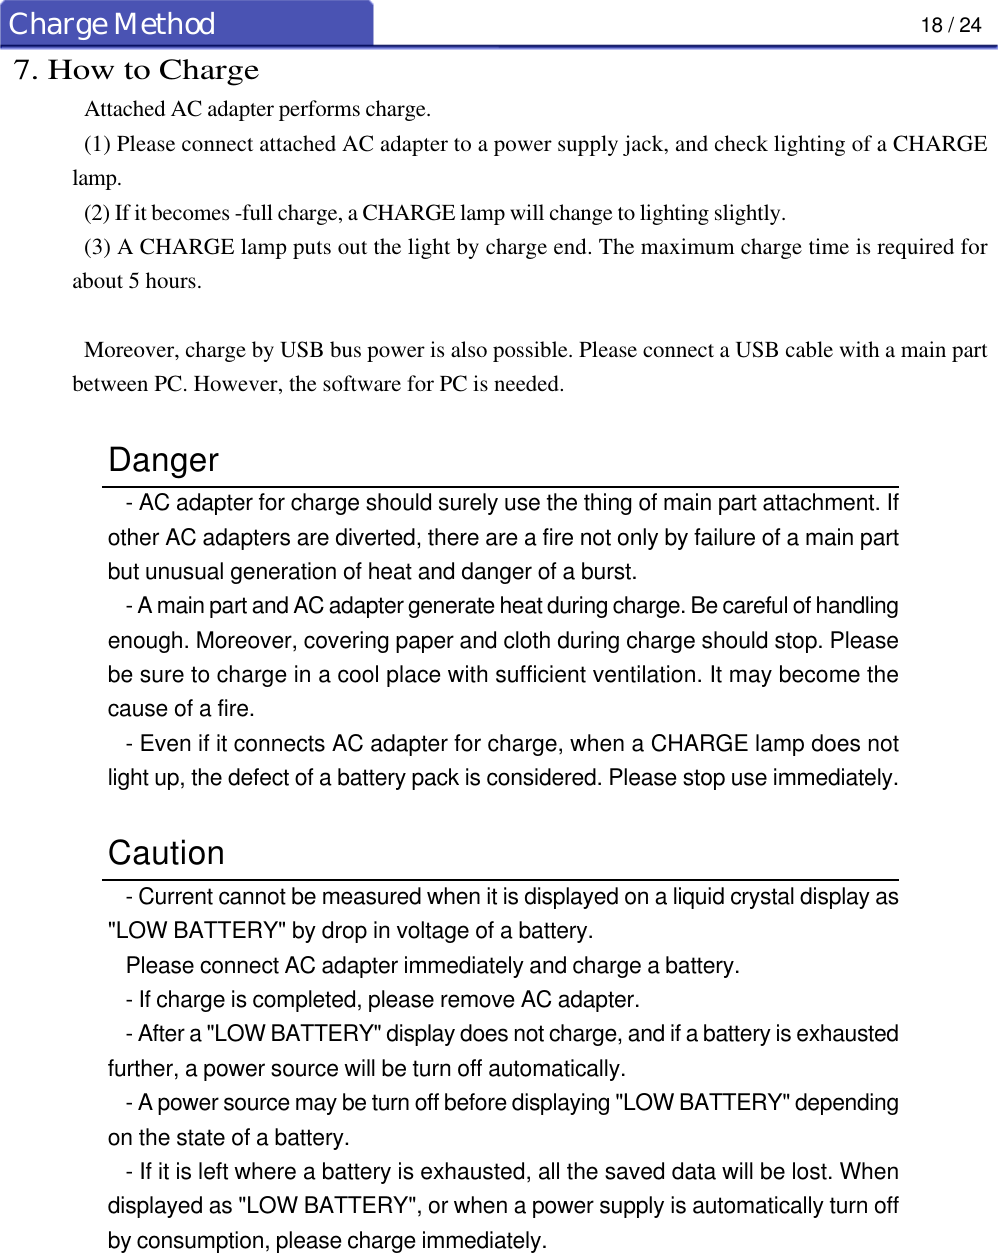 18 / 24Charge Method7. How to ChargeAttached AC adapter performs charge.(1) Please connect attached AC adapter to a power supply jack, and check lighting of a CHARGElamp.(2) If it becomes -full charge, a CHARGE lamp will change to lighting slightly.(3) A CHARGE lamp puts out the light by charge end. The maximum charge time is required forabout 5 hours.Moreover, charge by USB bus power is also possible. Please connect a USB cable with a main partbetween PC. However, the software for PC is needed.Danger- AC adapter for charge should surely use the thing of main part attachment. Ifother AC adapters are diverted, there are a fire not only by failure of a main partbut unusual generation of heat and danger of a burst.- A main part and AC adapter generate heat during charge. Be careful of handlingenough. Moreover, covering paper and cloth during charge should stop. Pleasebe sure to charge in a cool place with sufficient ventilation. It may become thecause of a fire.- Even if it connects AC adapter for charge, when a CHARGE lamp does notlight up, the defect of a battery pack is considered. Please stop use immediately.Caution- Current cannot be measured when it is displayed on a liquid crystal display as&quot;LOW BATTERY&quot; by drop in voltage of a battery.Please connect AC adapter immediately and charge a battery.- If charge is completed, please remove AC adapter.- After a &quot;LOW BATTERY&quot; display does not charge, and if a battery is exhaustedfurther, a power source will be turn off automatically.- A power source may be turn off before displaying &quot;LOW BATTERY&quot; dependingon the state of a battery.- If it is left where a battery is exhausted, all the saved data will be lost. Whendisplayed as &quot;LOW BATTERY&quot;, or when a power supply is automatically turn offby consumption, please charge immediately.